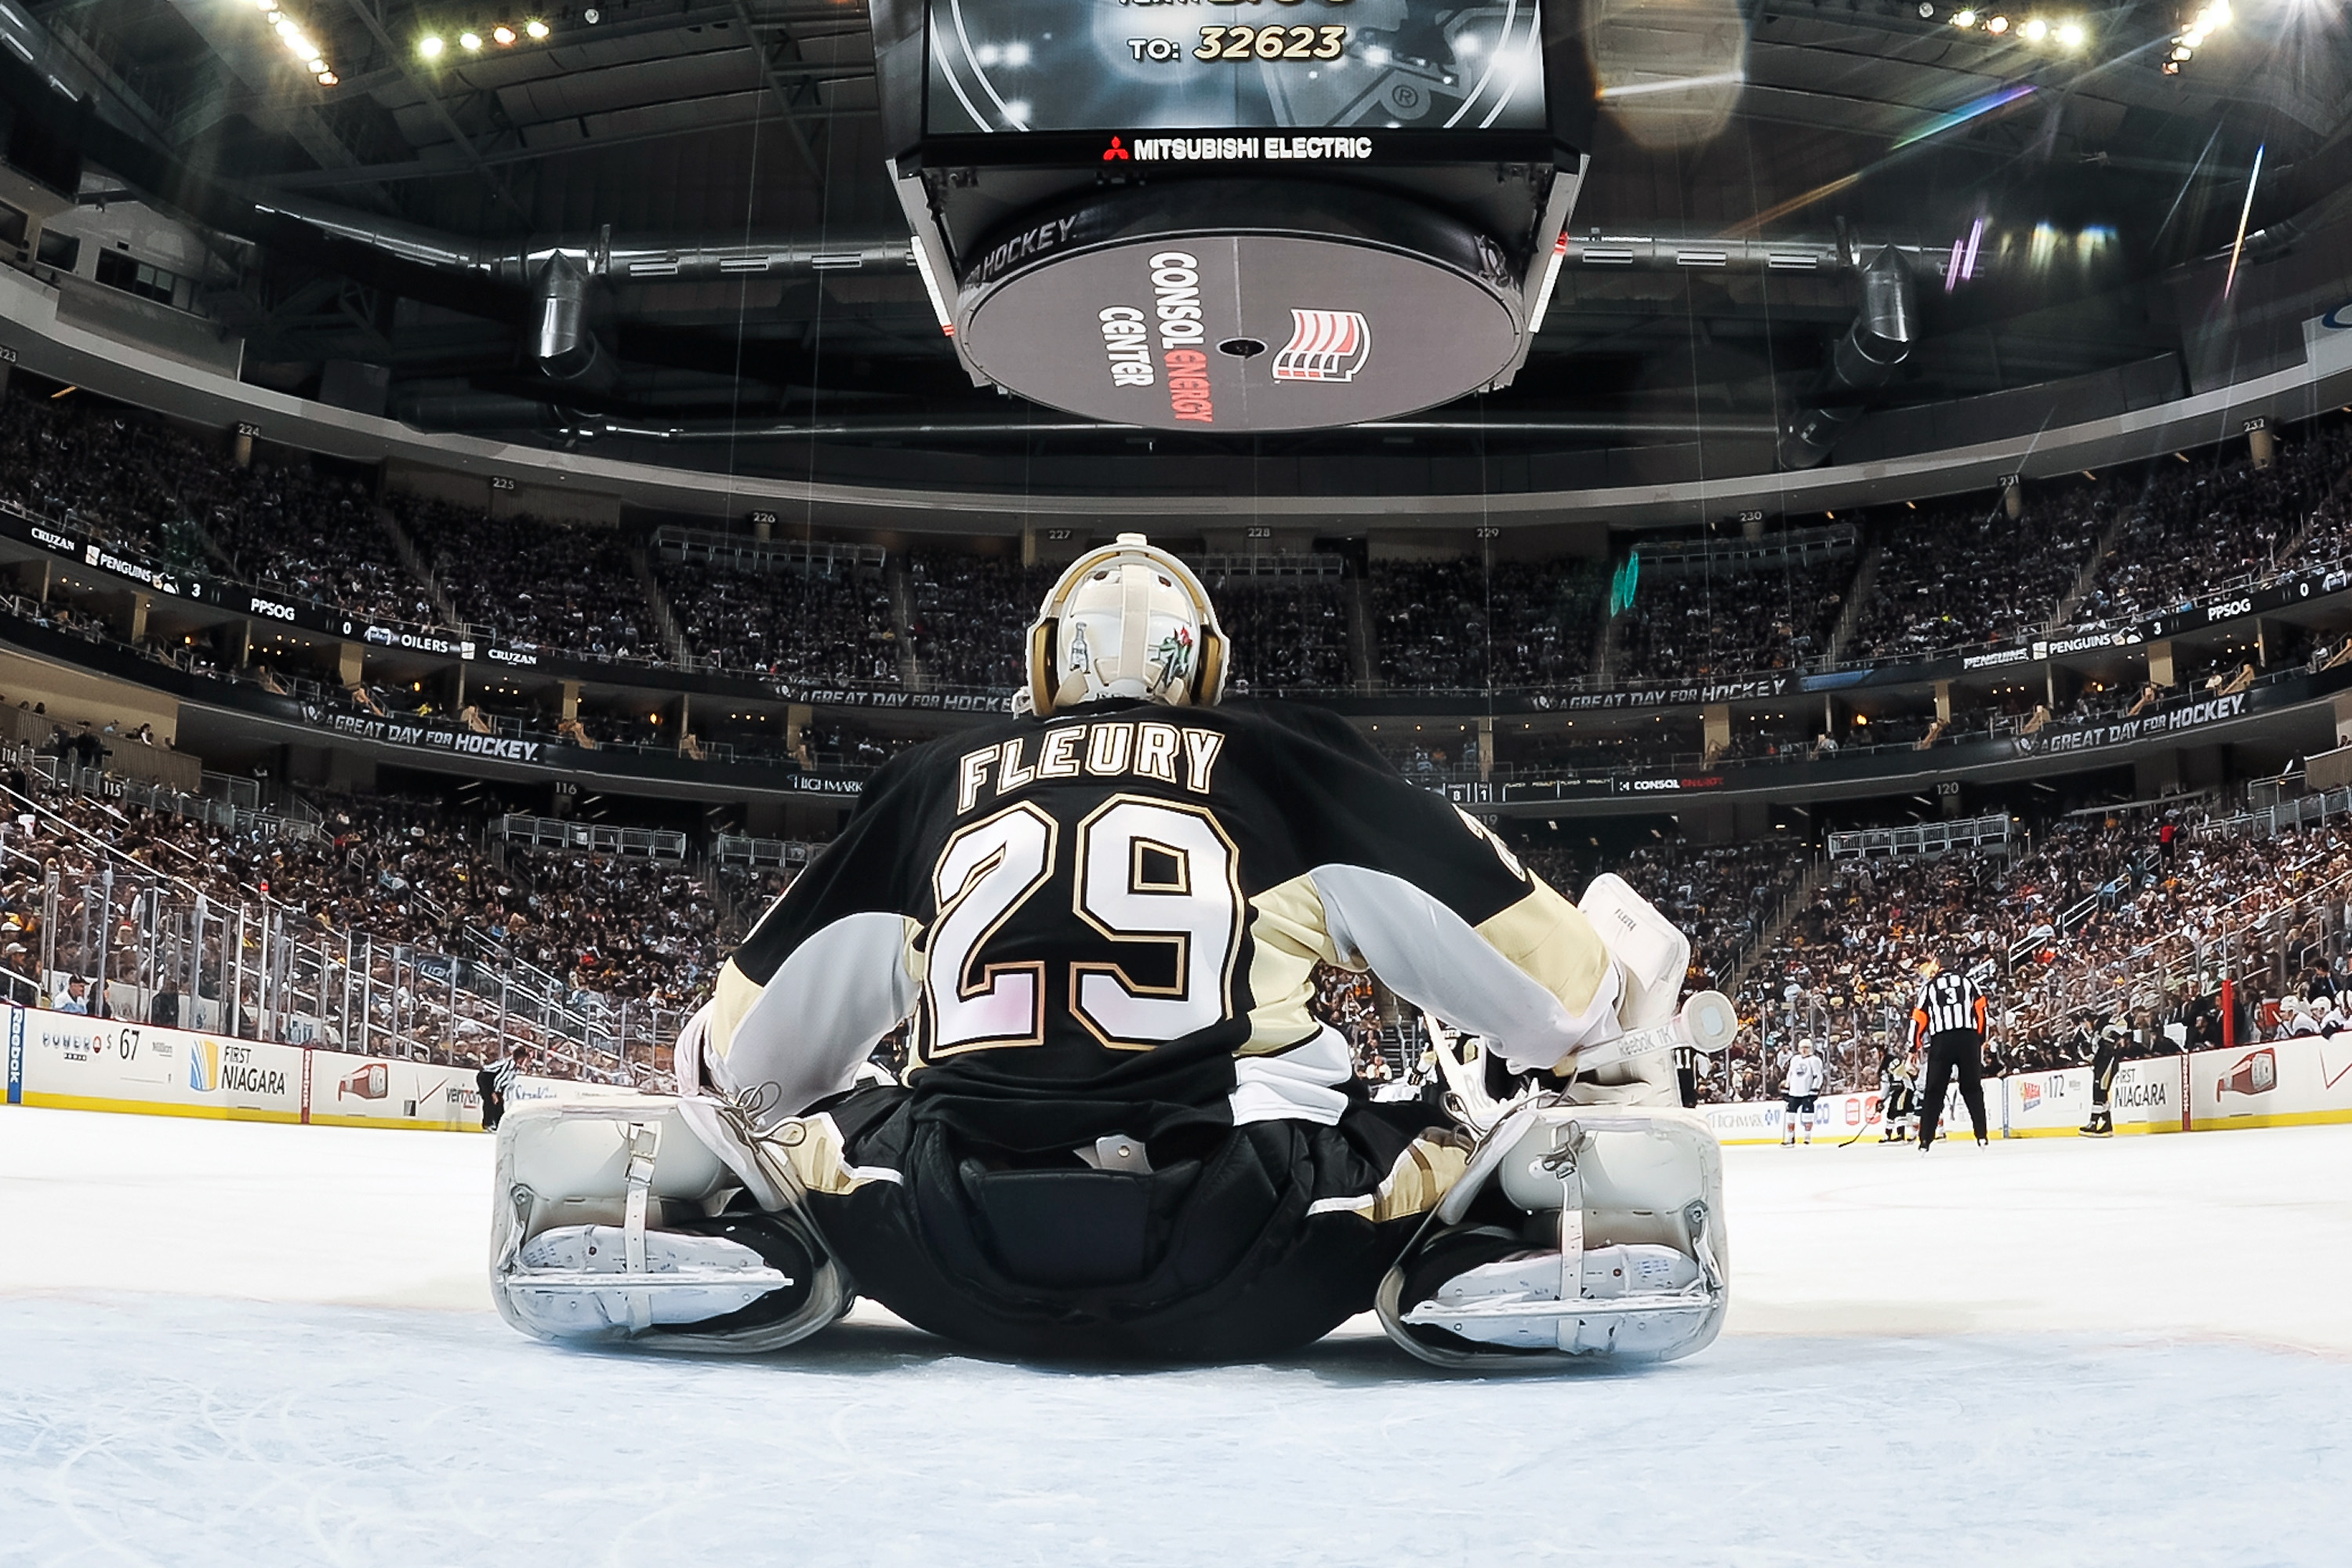 Marc-Andre Fleury pulled twelve minutes into game against Penguins